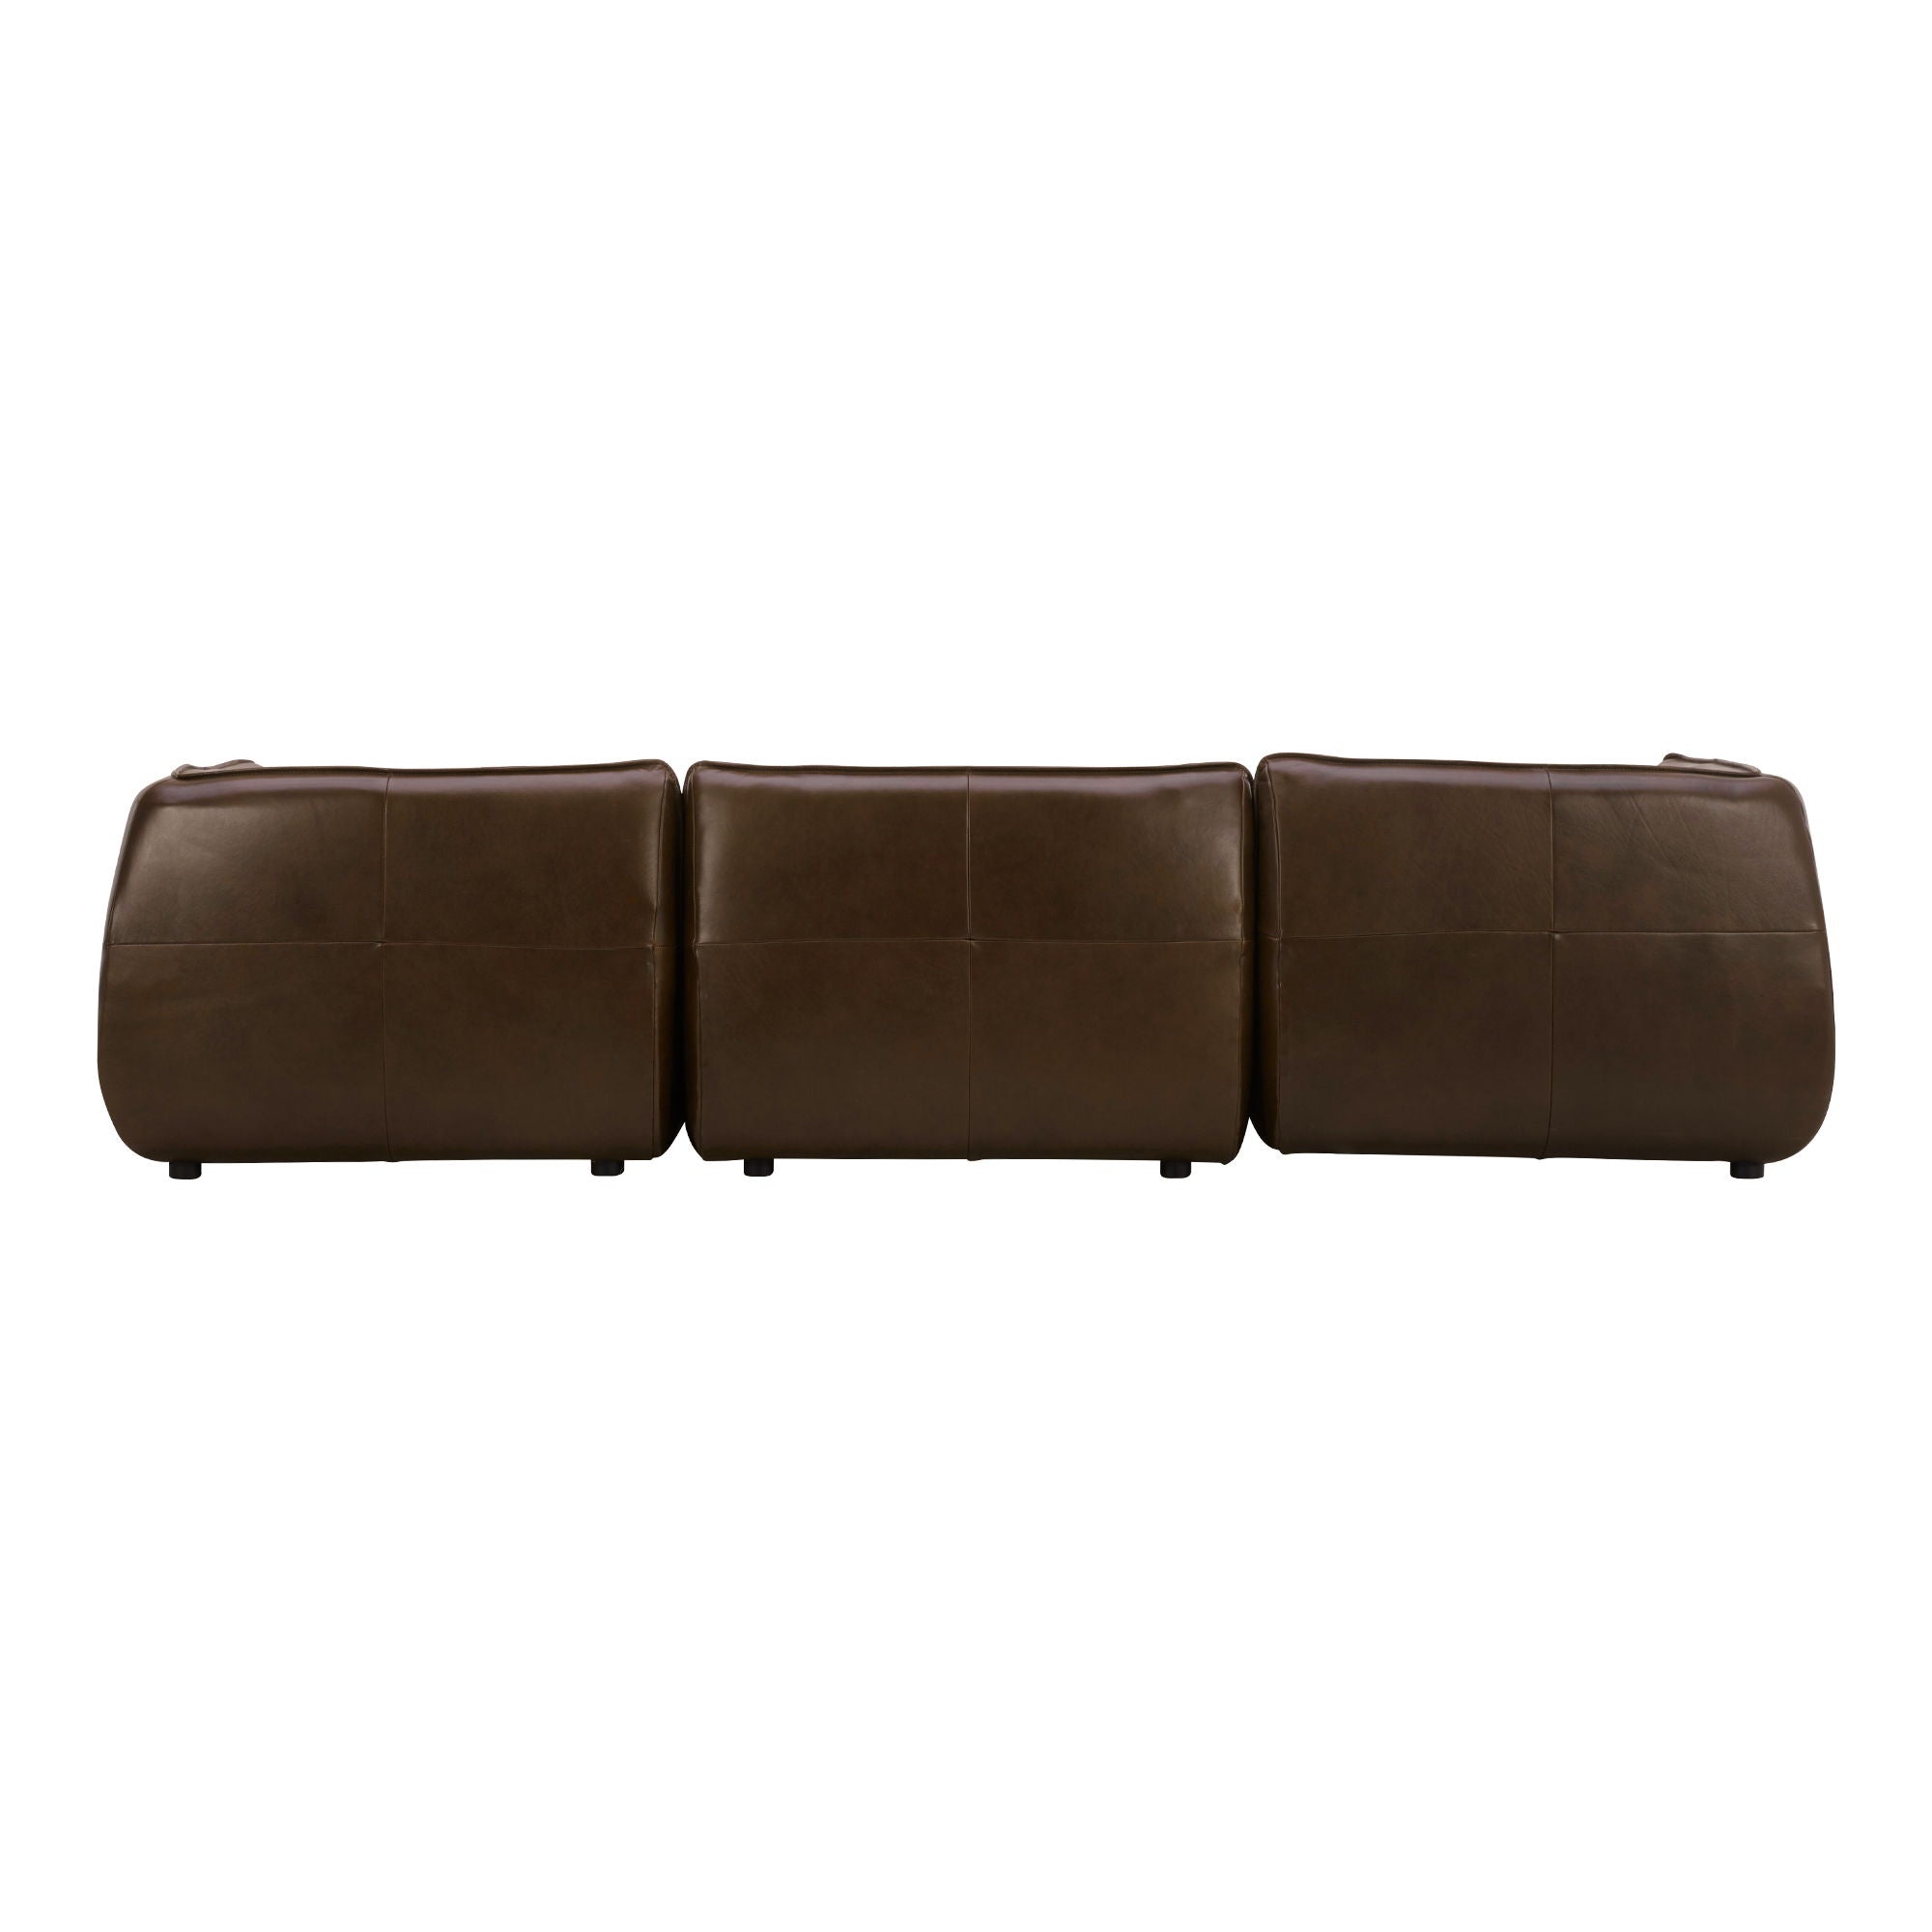 Brown Leather Sectional - Modular, Zeppelin Lounge-Stationary Sectionals-American Furniture Outlet